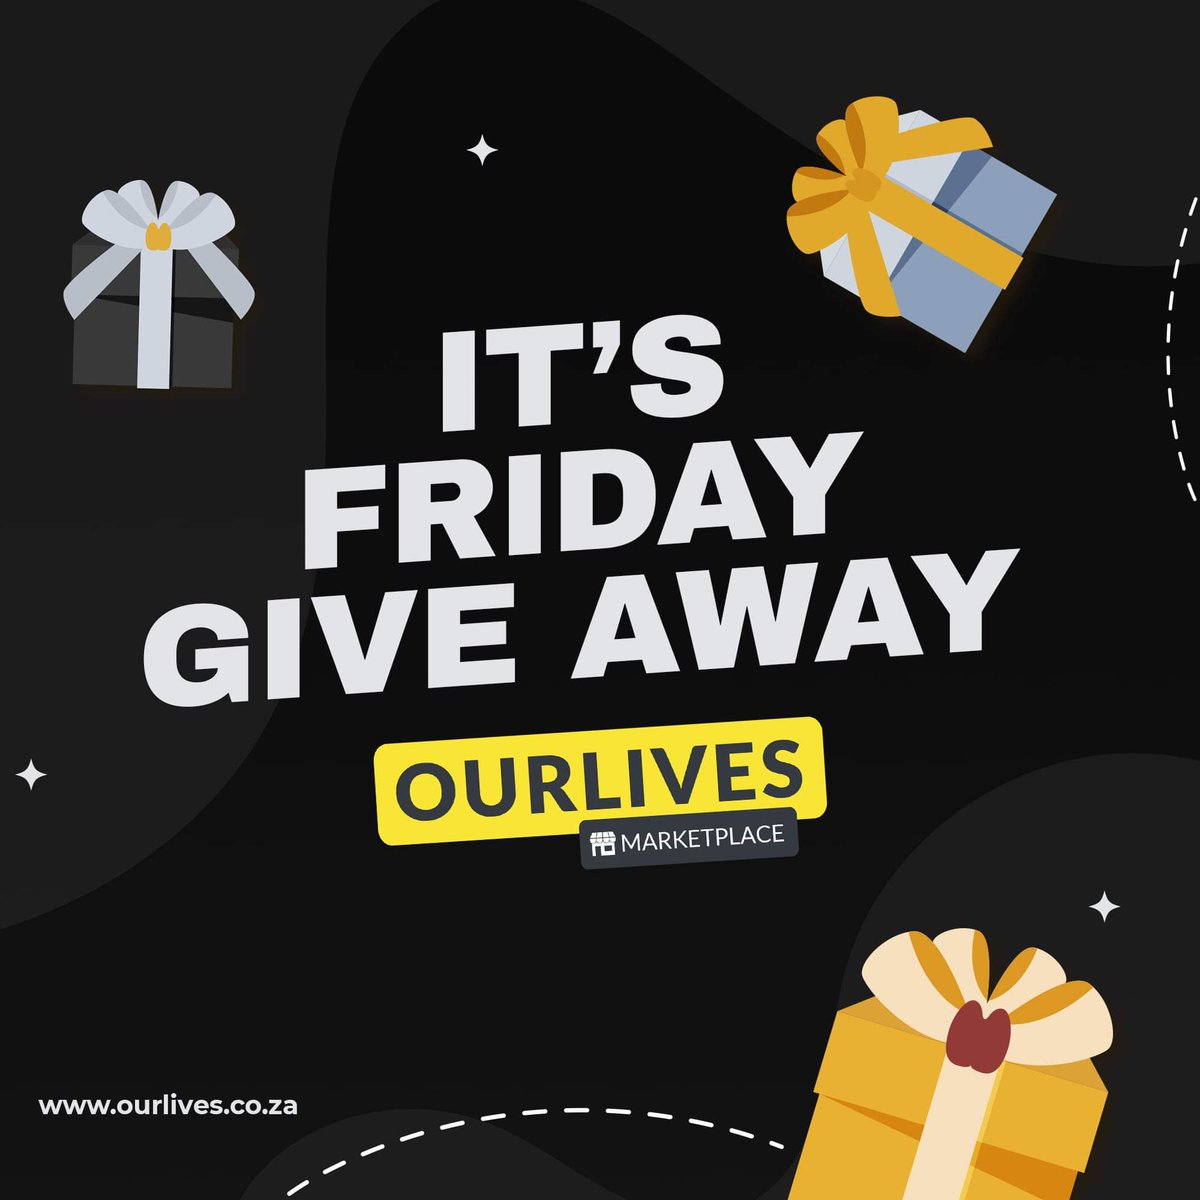 We giving away R150 cash to 2️⃣ lucky winners 🎉🏆

1. Follow us at @OurlivesMarket 
2. Repost PINNED tweet with #ProudlyLocal
2. Subscribe: youtube.com/@OurlivesMarke…

Competition ends 6pm today, Winners chosen randomly  

T&C's Apply - Follow instructions ❤️